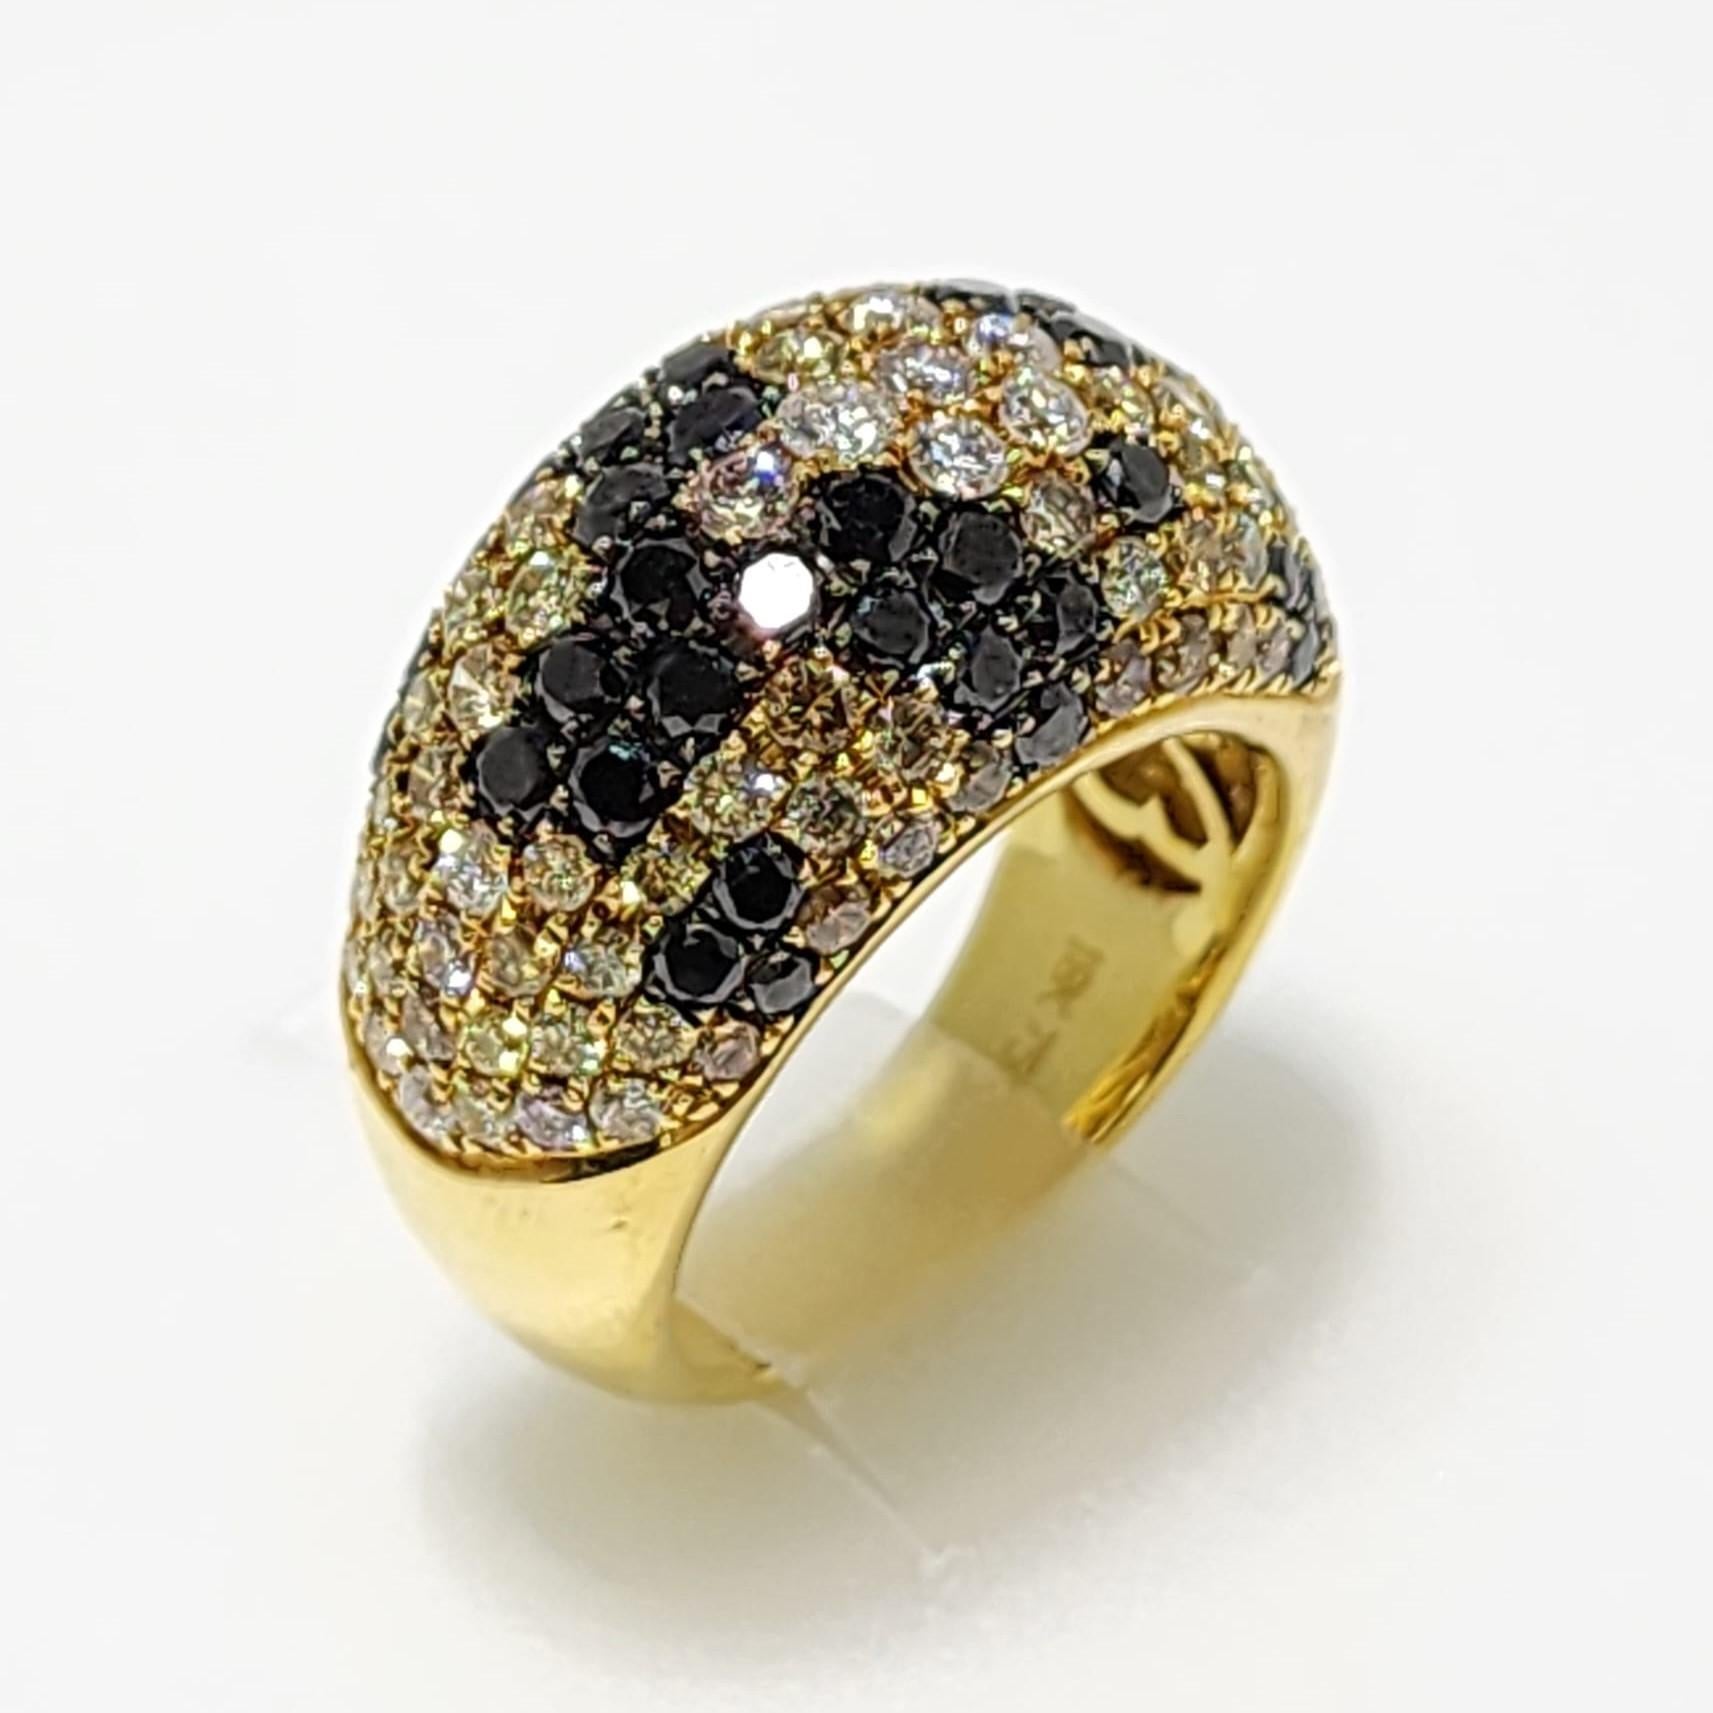 Contemporary Vintage 3.50 Carat Pave Color Diamond 9 Row Dome Ring in 18 Karat Yellow Gold